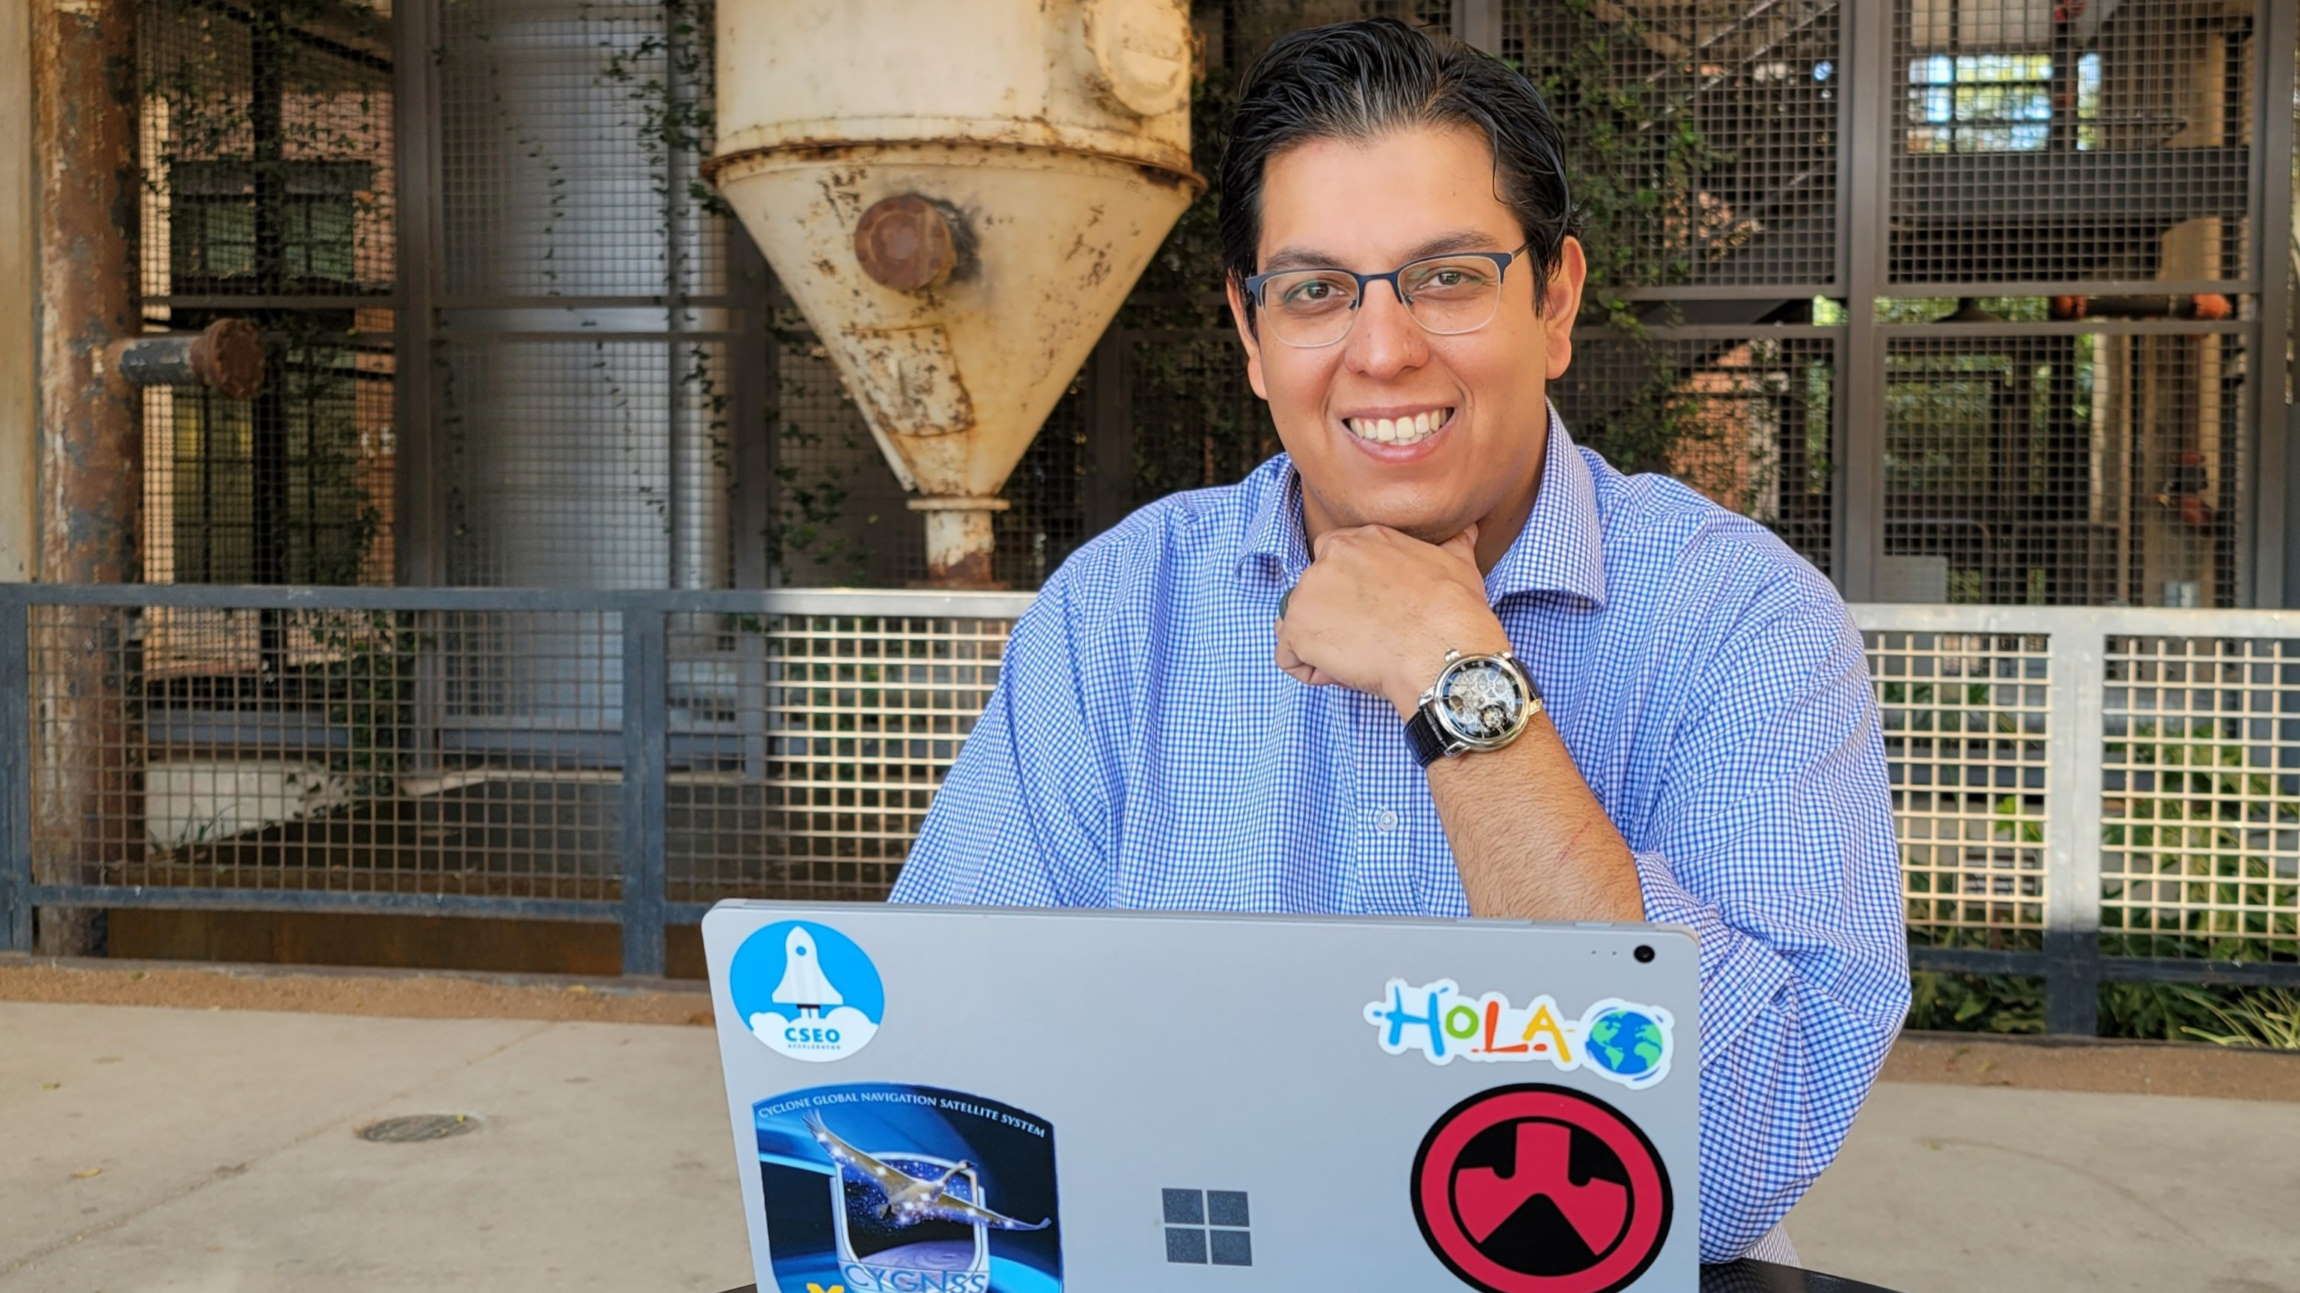 Paul Rojas sits at an outdoor table with his laptop and smiles at the camera.